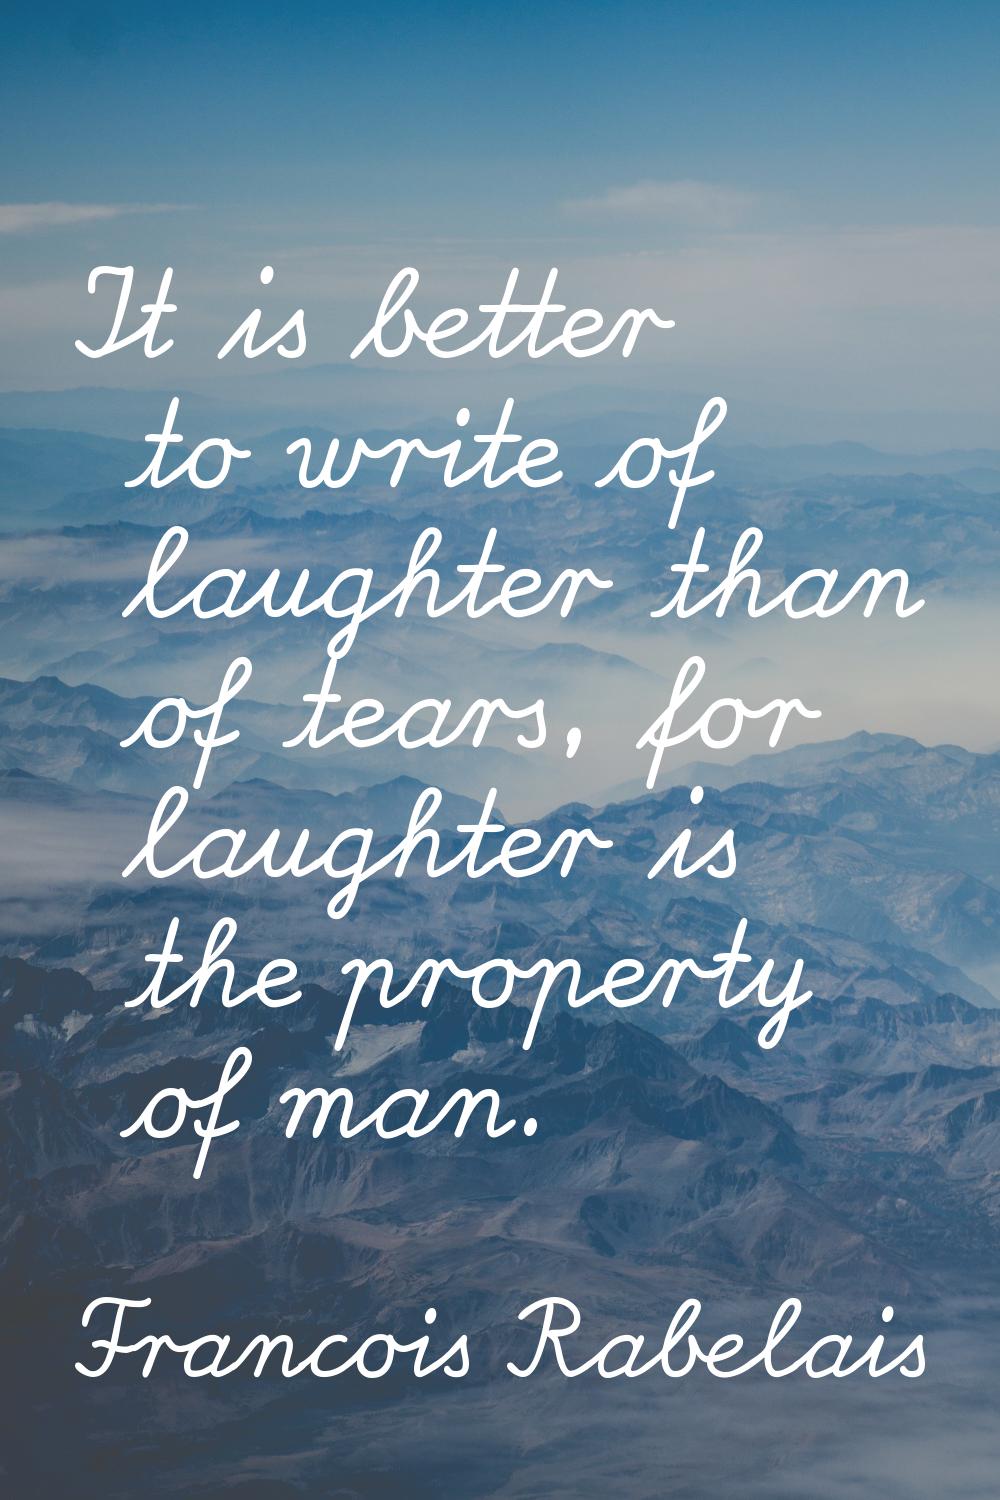 It is better to write of laughter than of tears, for laughter is the property of man.